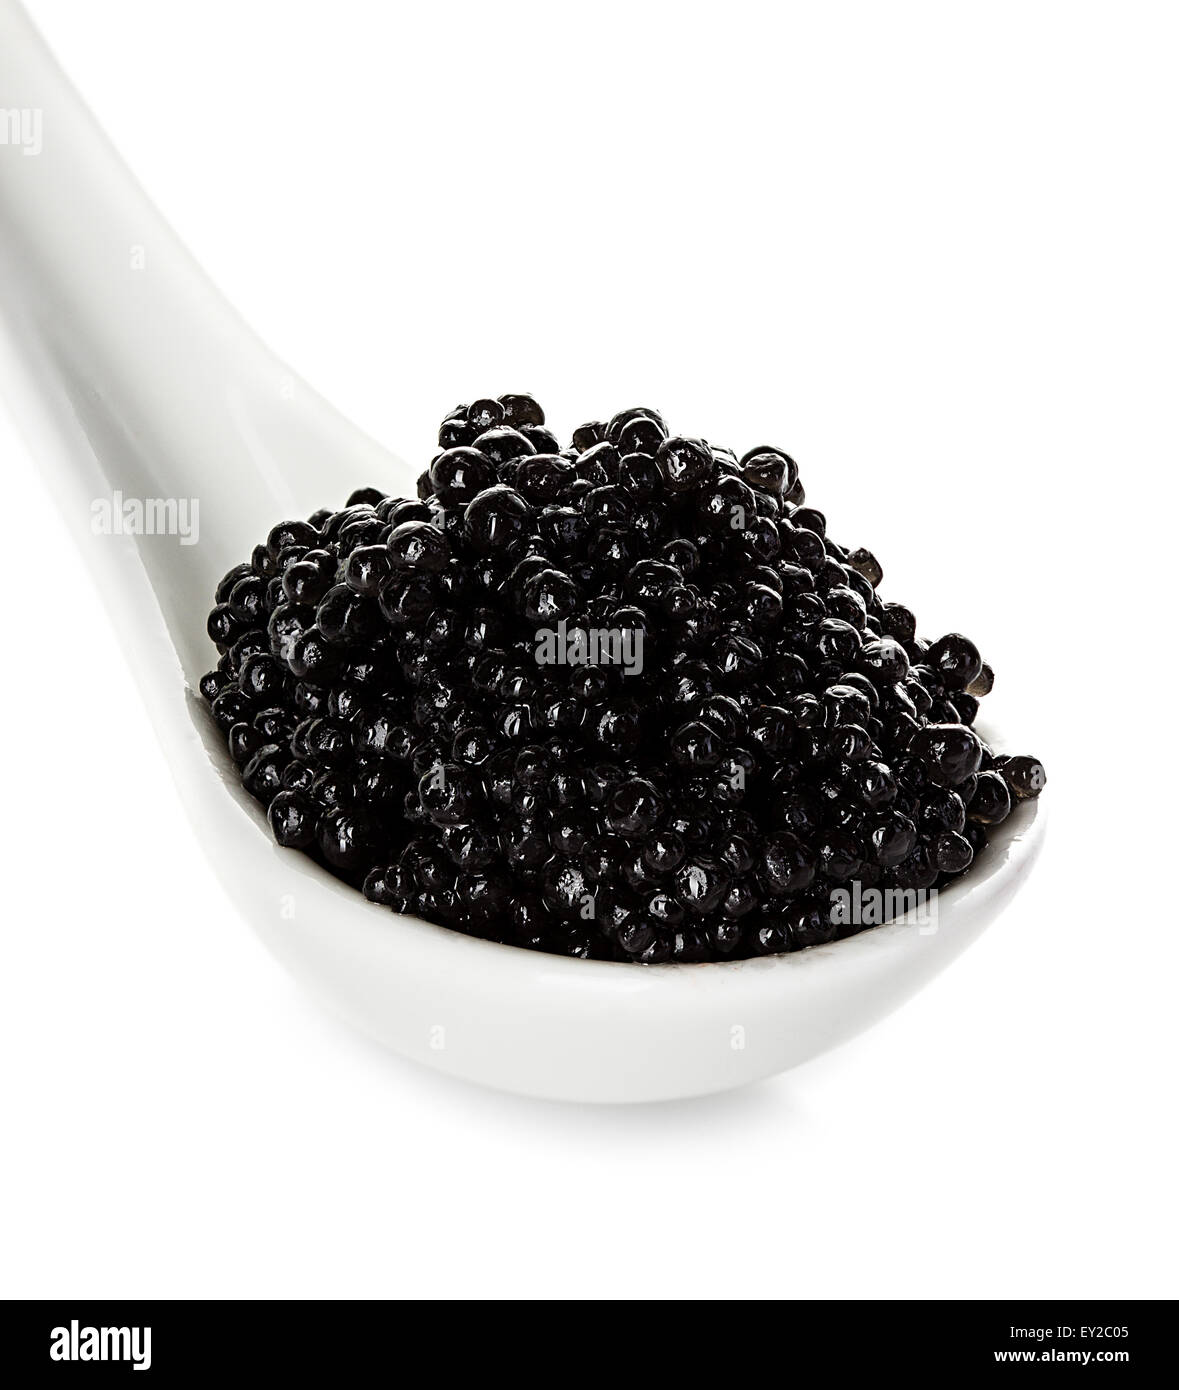 Black caviar in a spoon isolated on white background Stock Photo